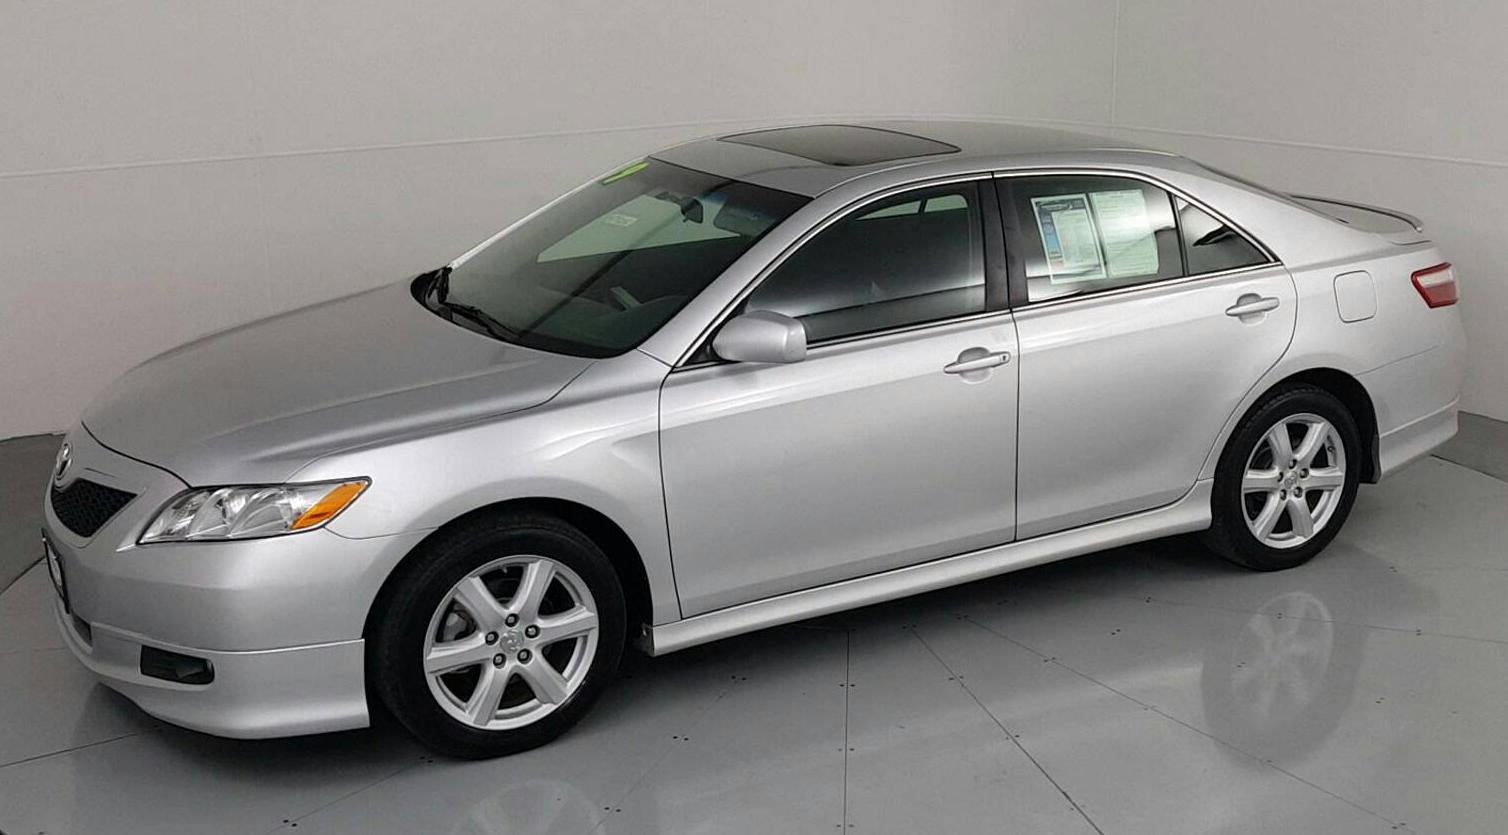 Pre-Owned 2009 TOYOTA Camry SE 4-door Mid-Size Passenger Car in ...